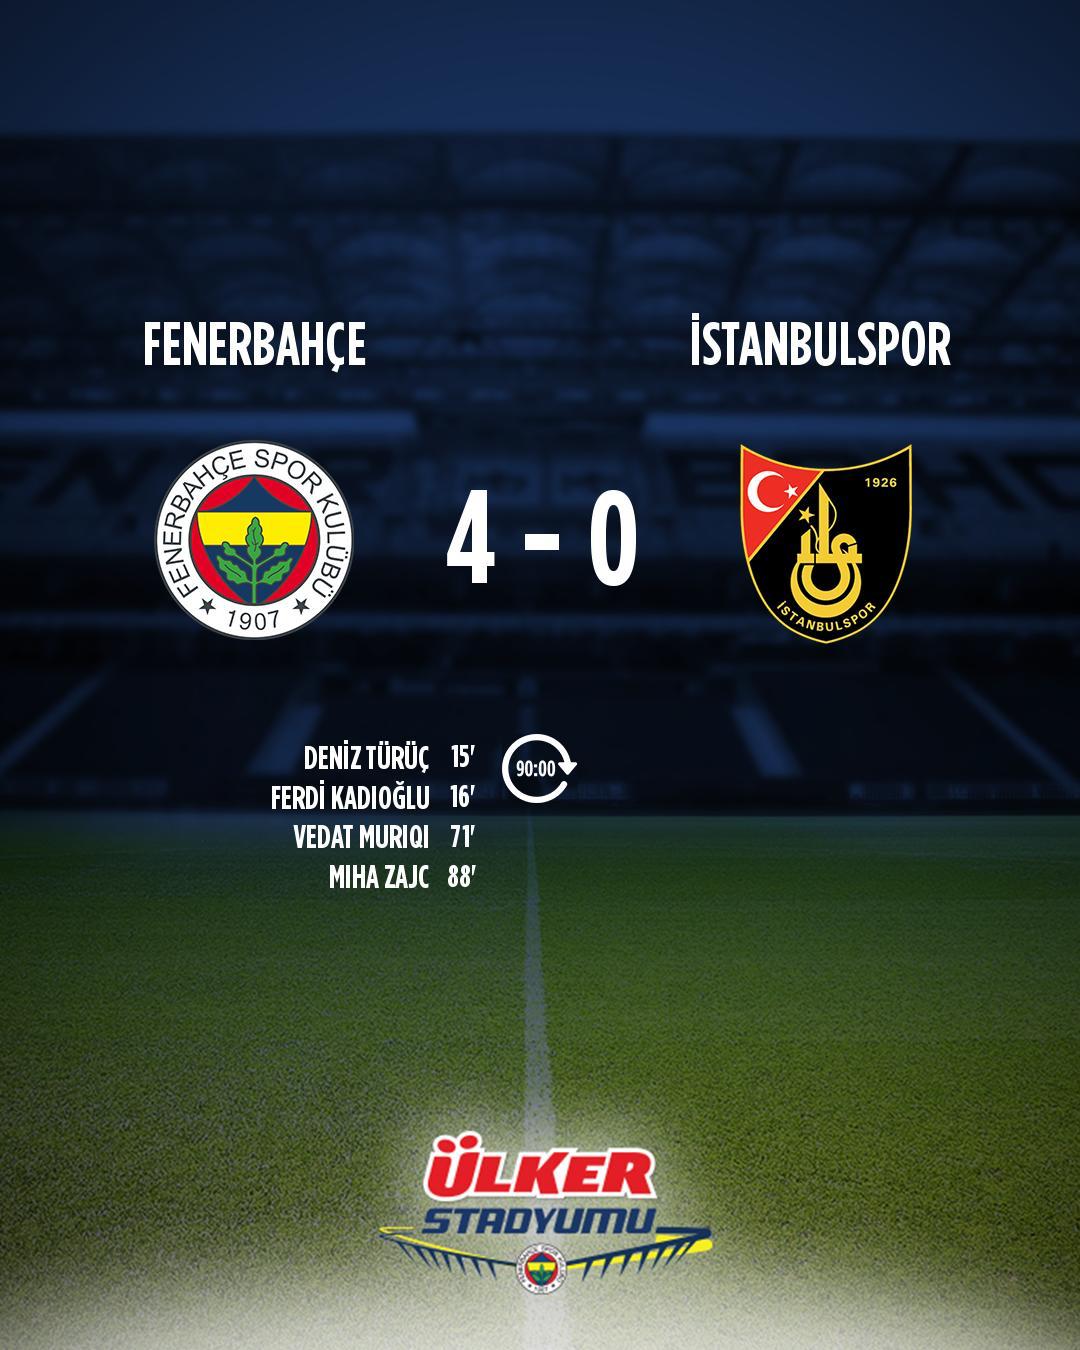 Fenerbahçe vs Trabzonspor: A Rivalry Rooted in History